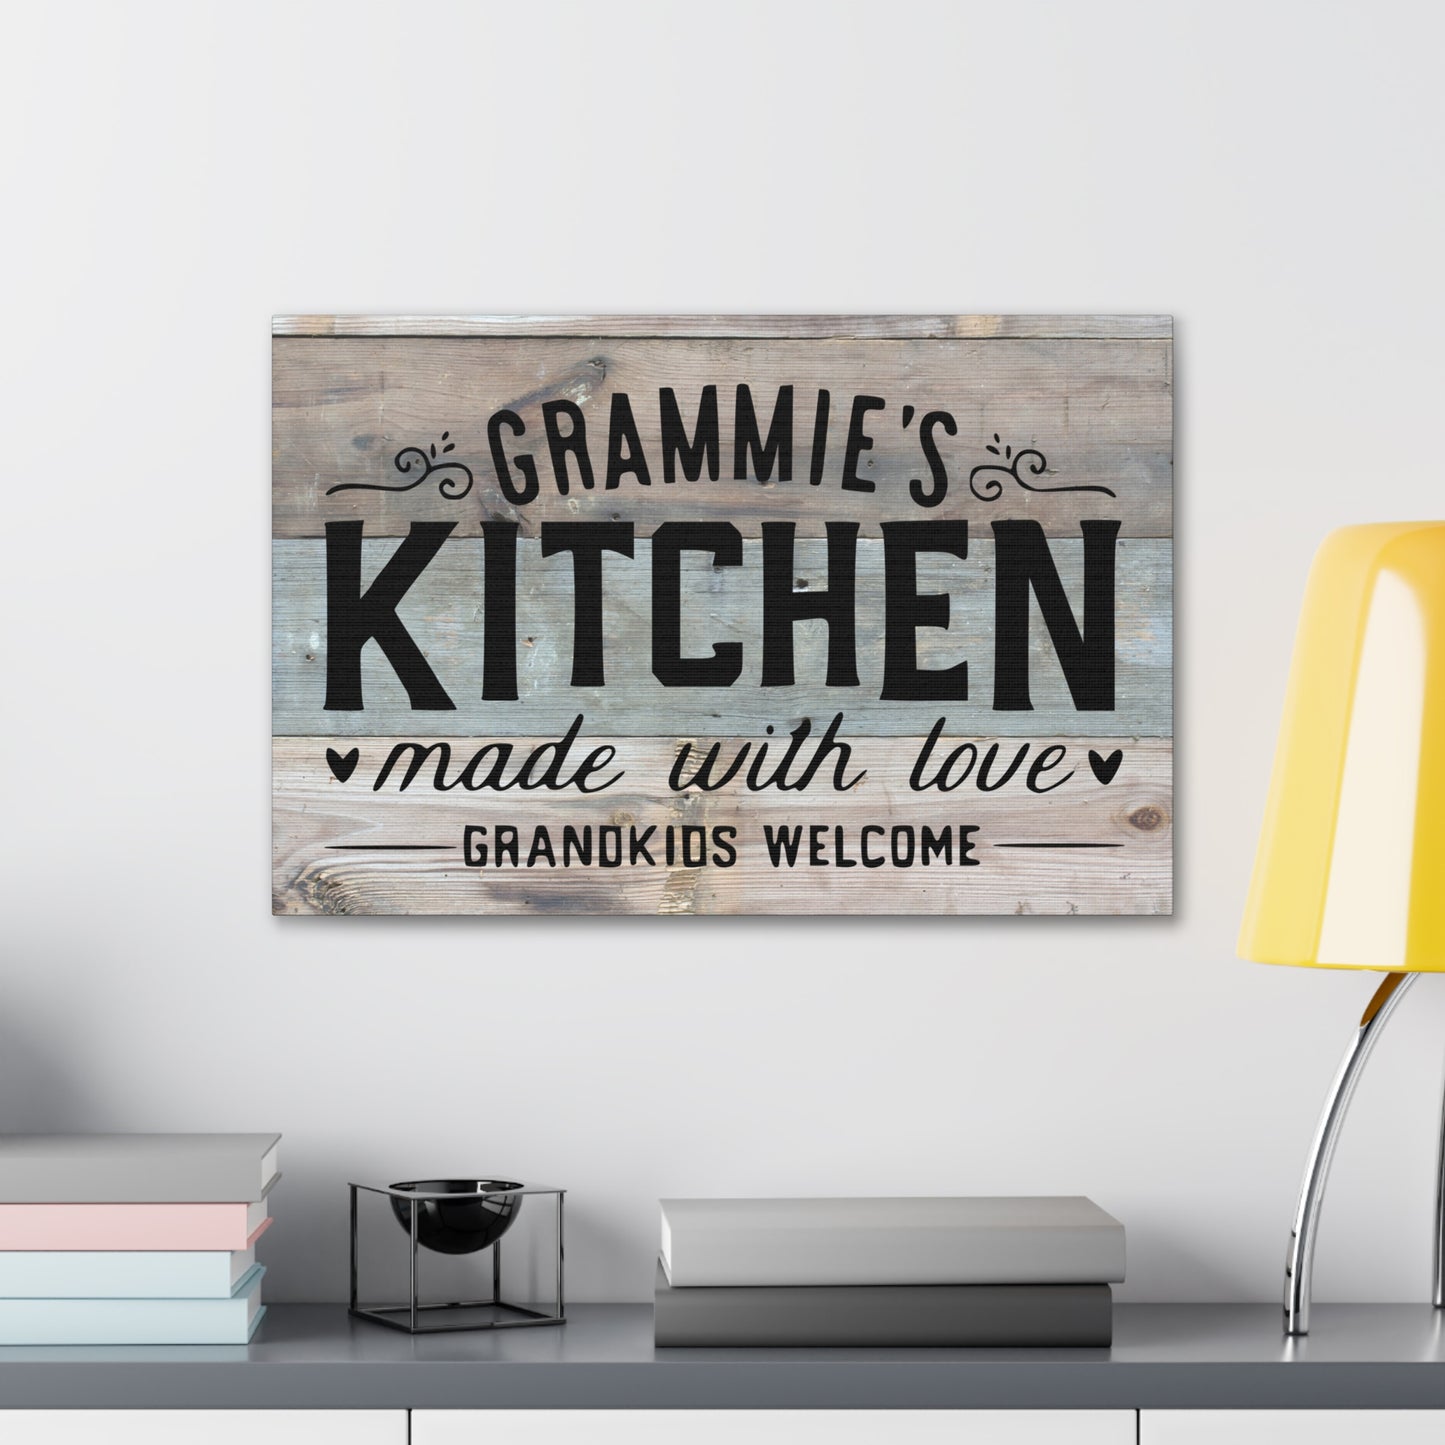 "Indoor use only high-quality kitchen canvas print"